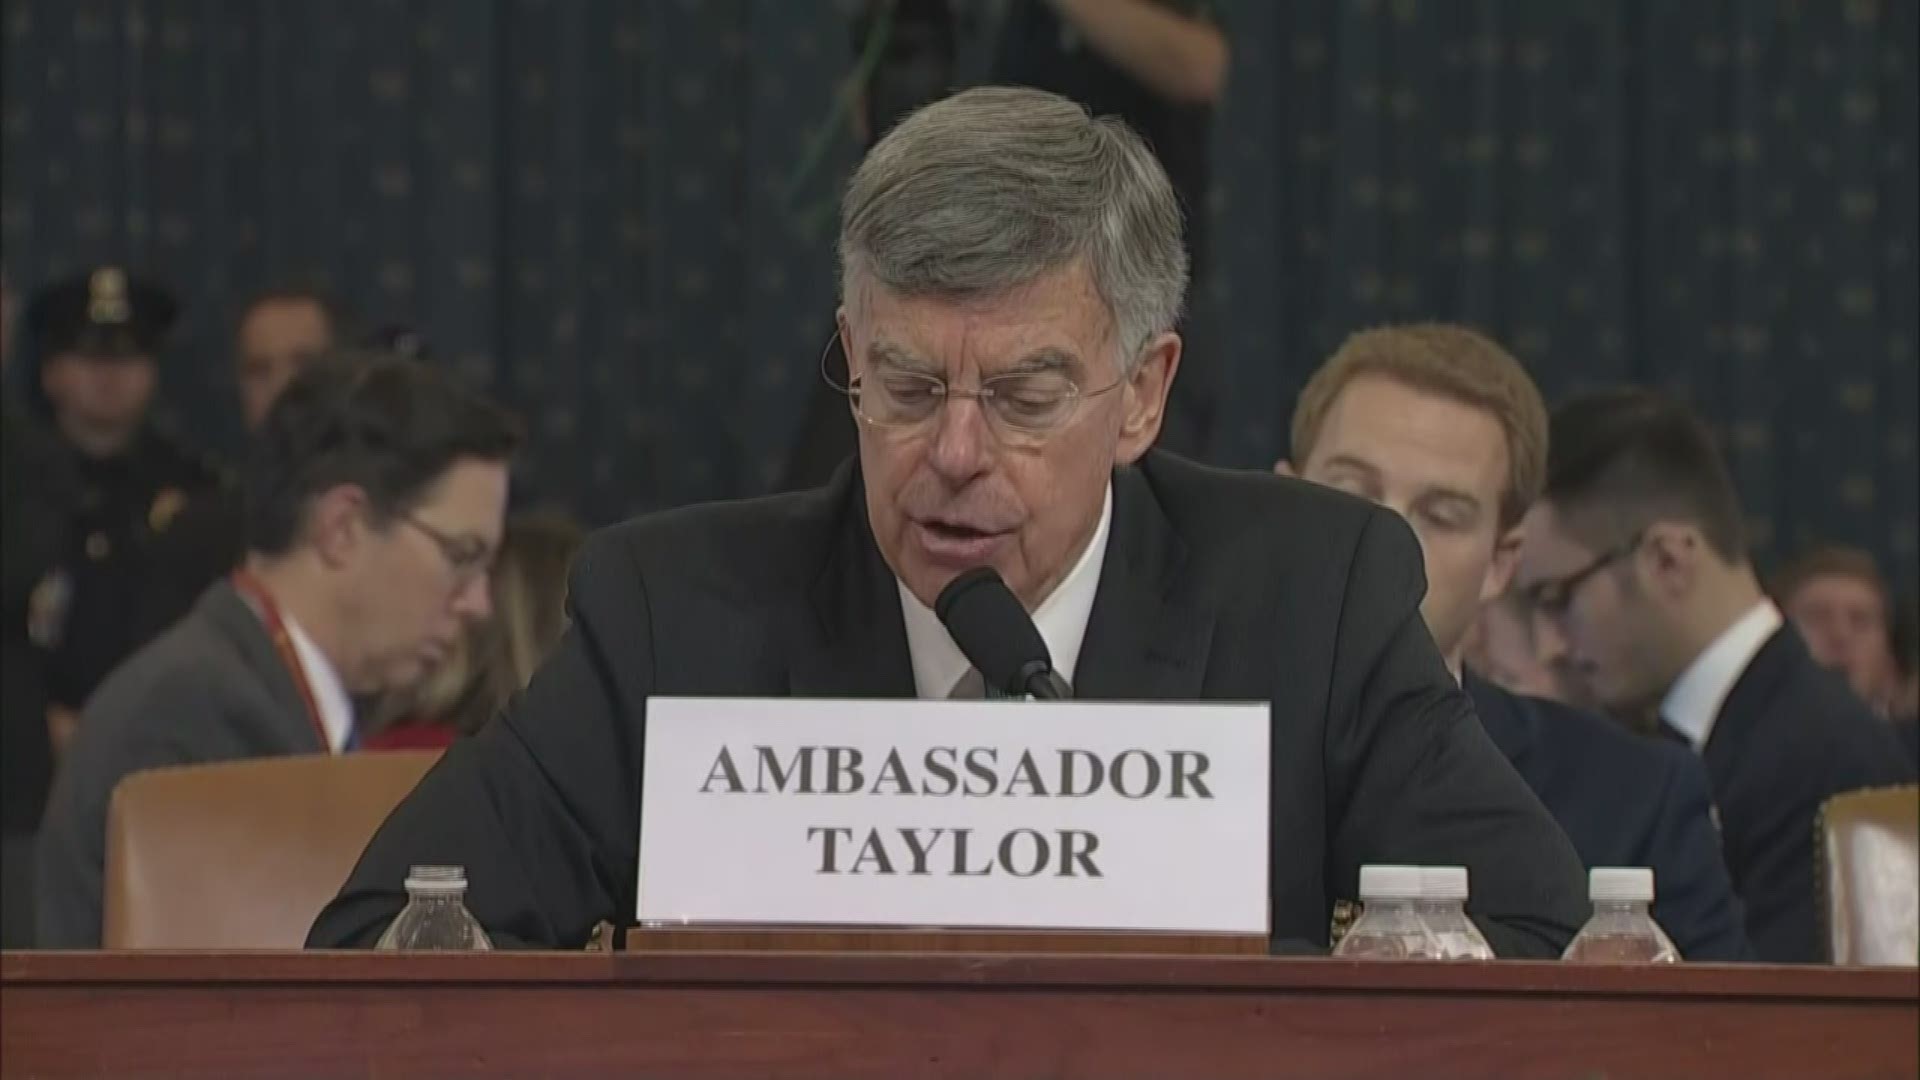 William Taylor made the statement Wednesday in the first public hearing in the House impeachment inquiry.